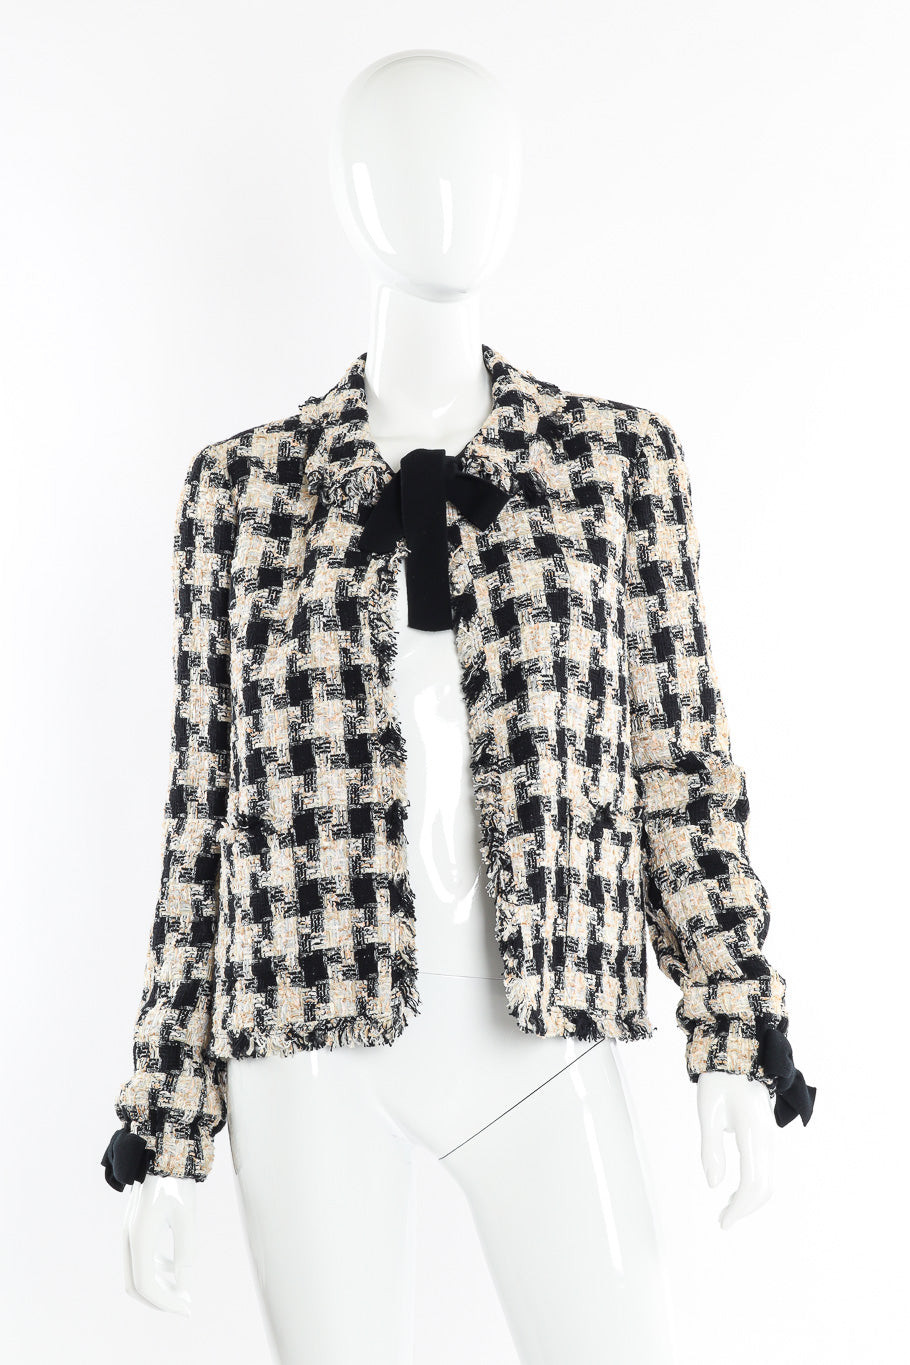 Chanel Houndstooth Black And White Jacket